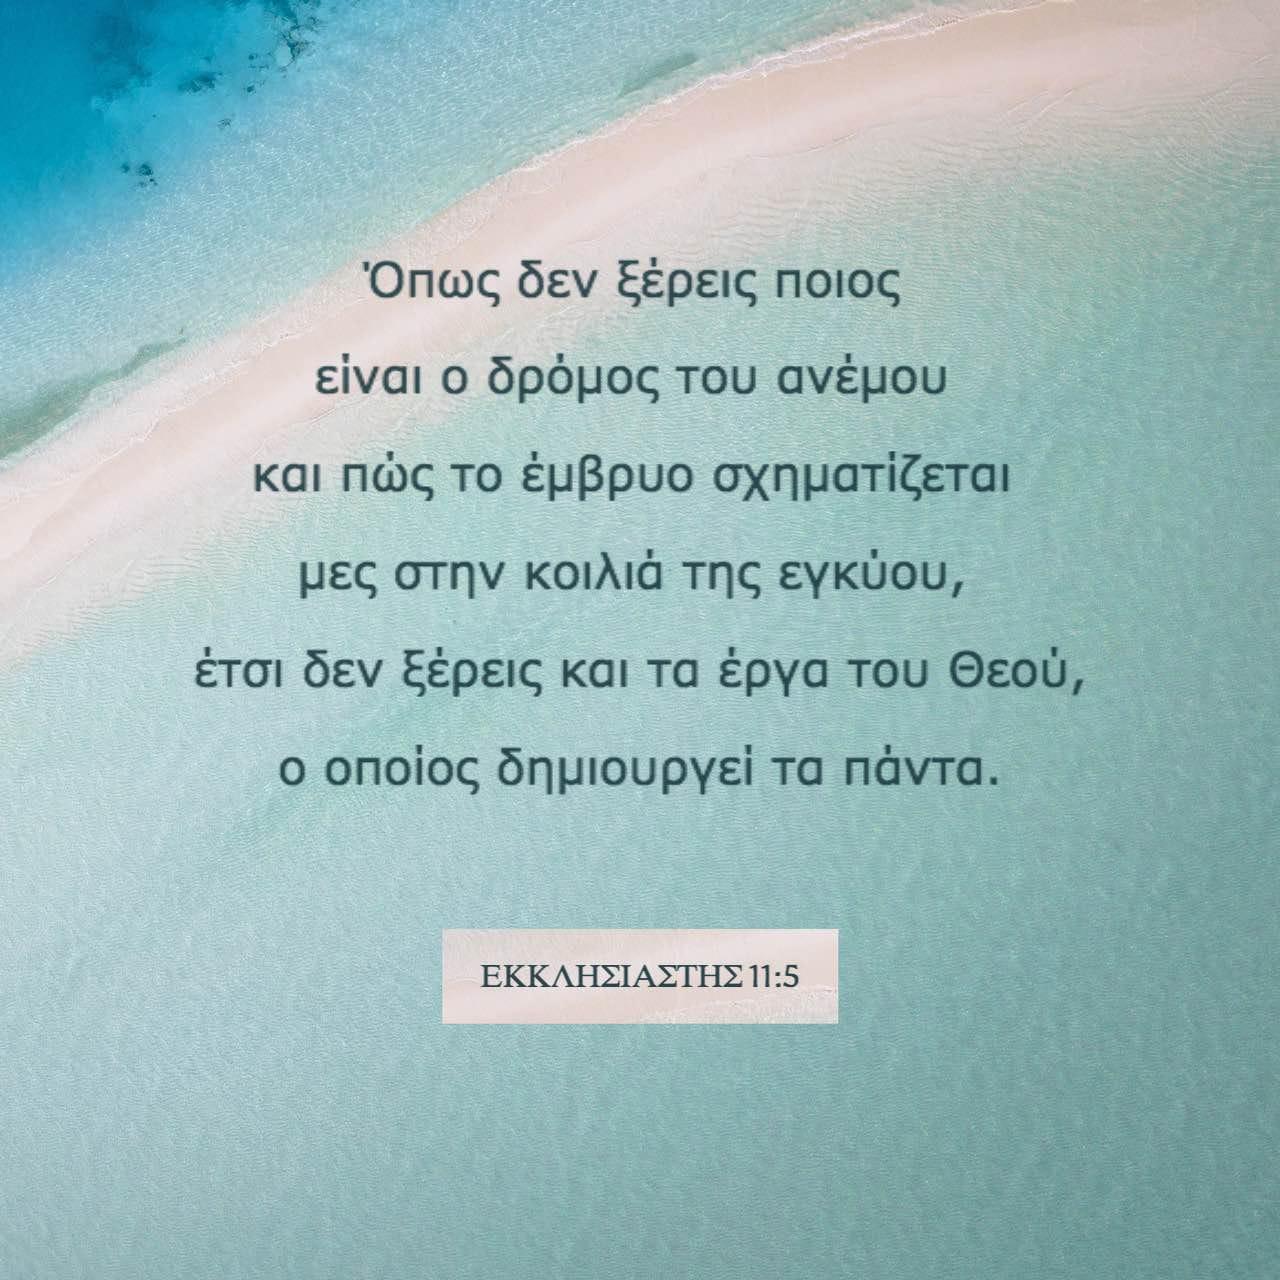 Bible Verse of the Day - day 86 - image 26822 (ΕΚΚΛΗΣΙΑΣΤΗΣ 11:5)